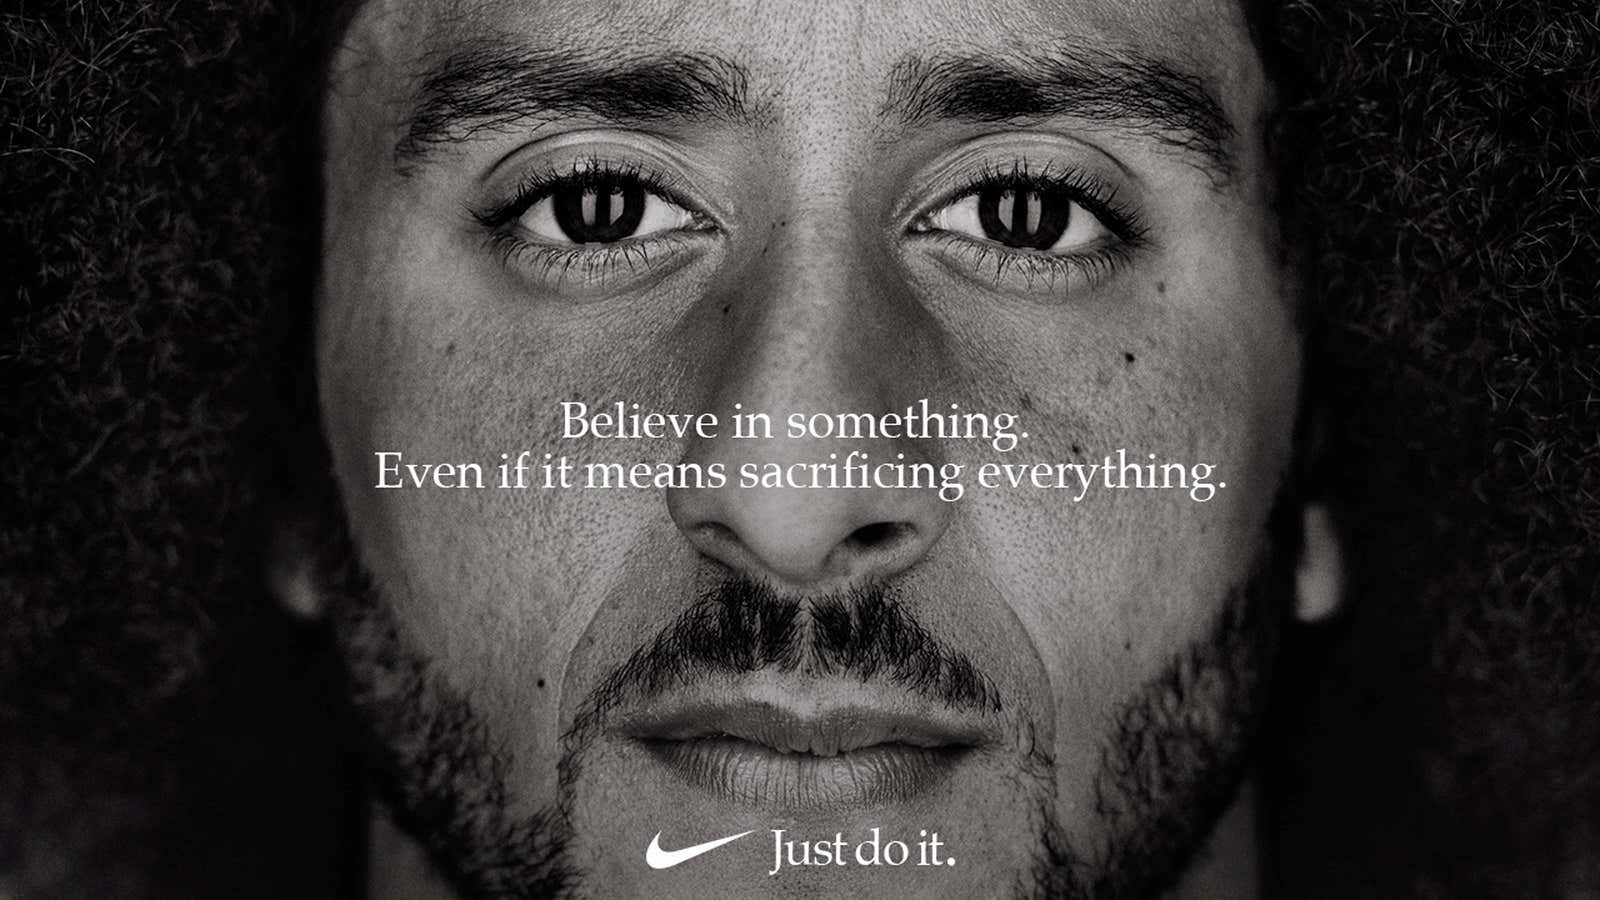 How much will Nike have to sacrifice?